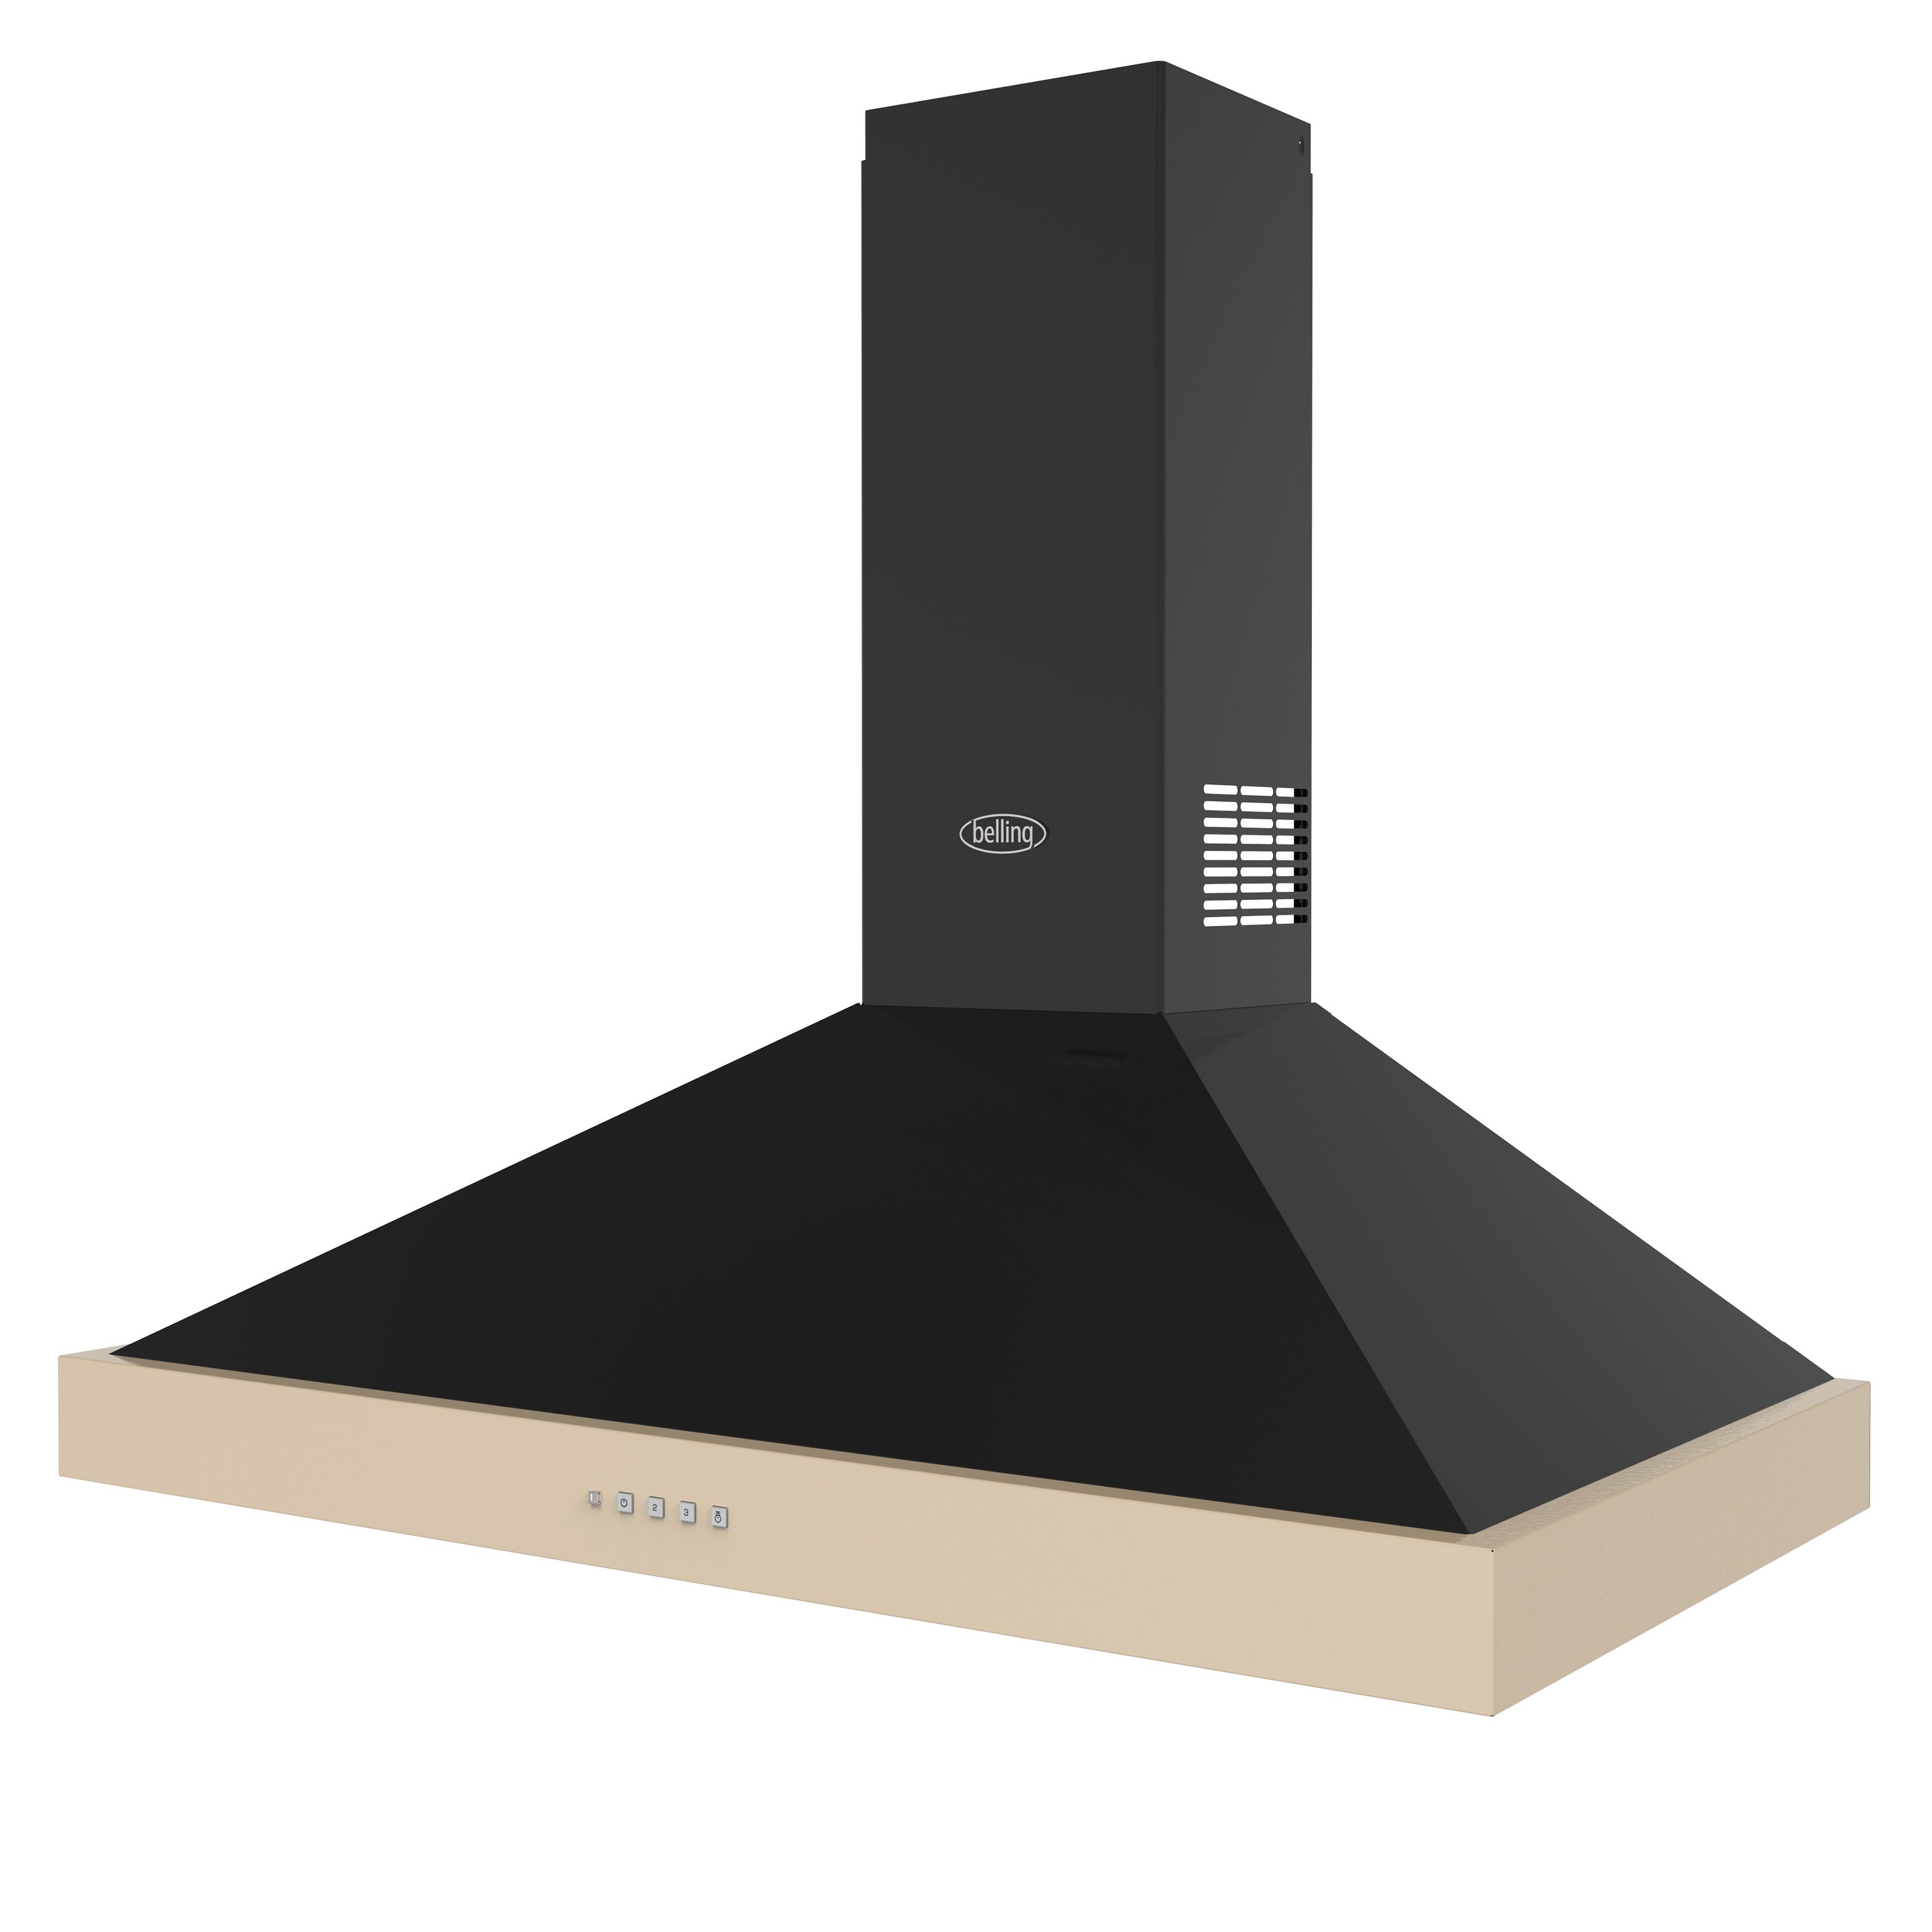 90cm Chimney hood with 3 fan speeds, 2 LED lights, 2 washable grease filters and extendable chimney section